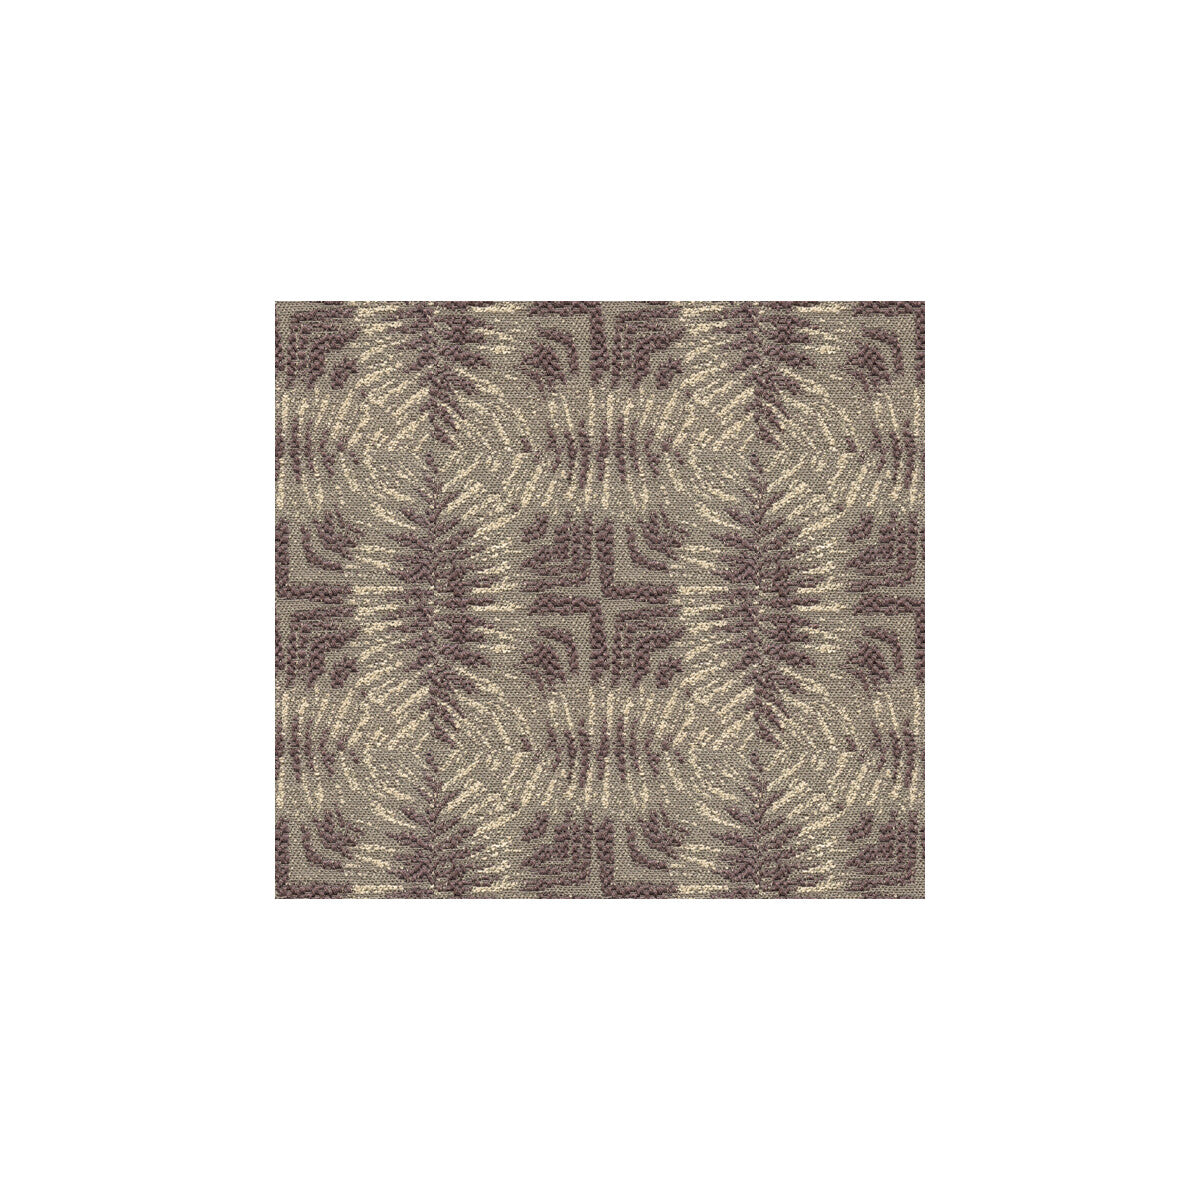 Calypso fabric in mauve color - pattern GWF-3204.10.0 - by Lee Jofa Modern in the Allegra Hicks Islands collection